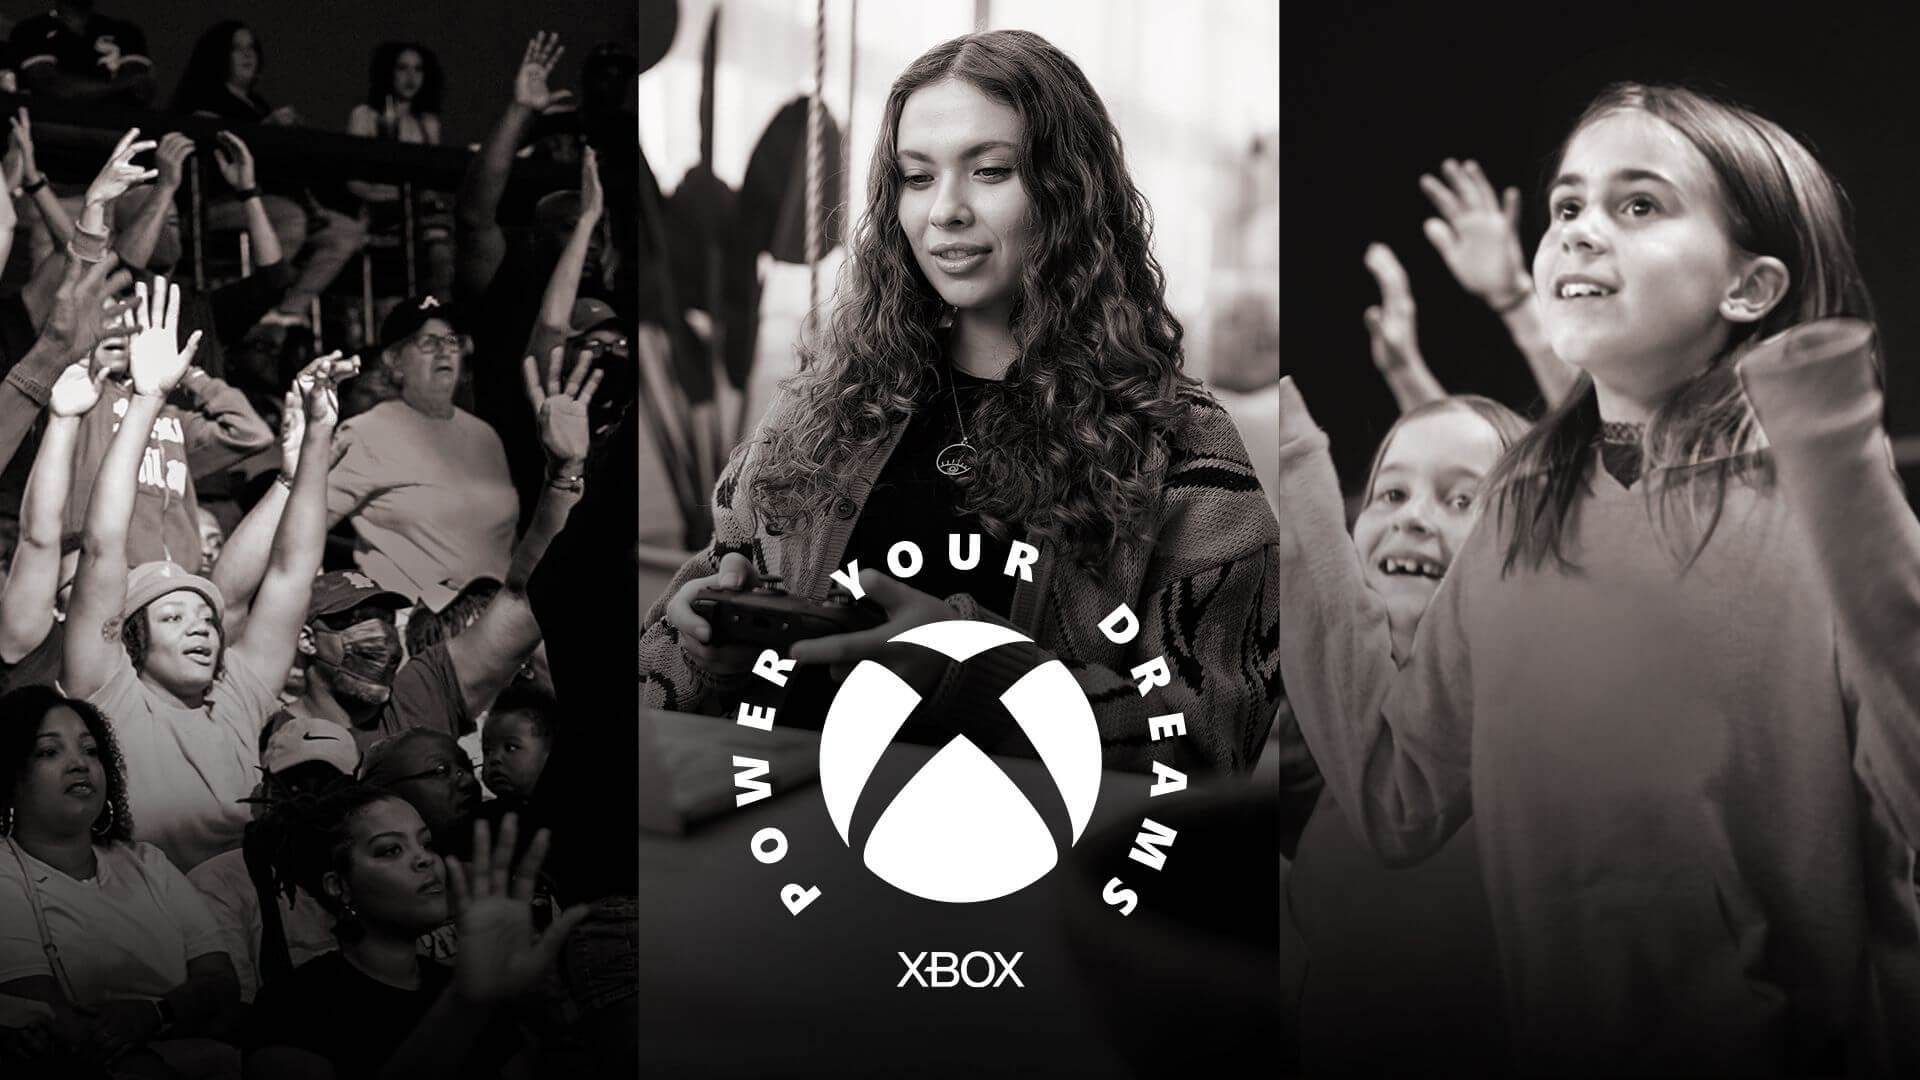 The Xbox Power Your Dreams banner, which shows women against a backdrop of the Xbox logo